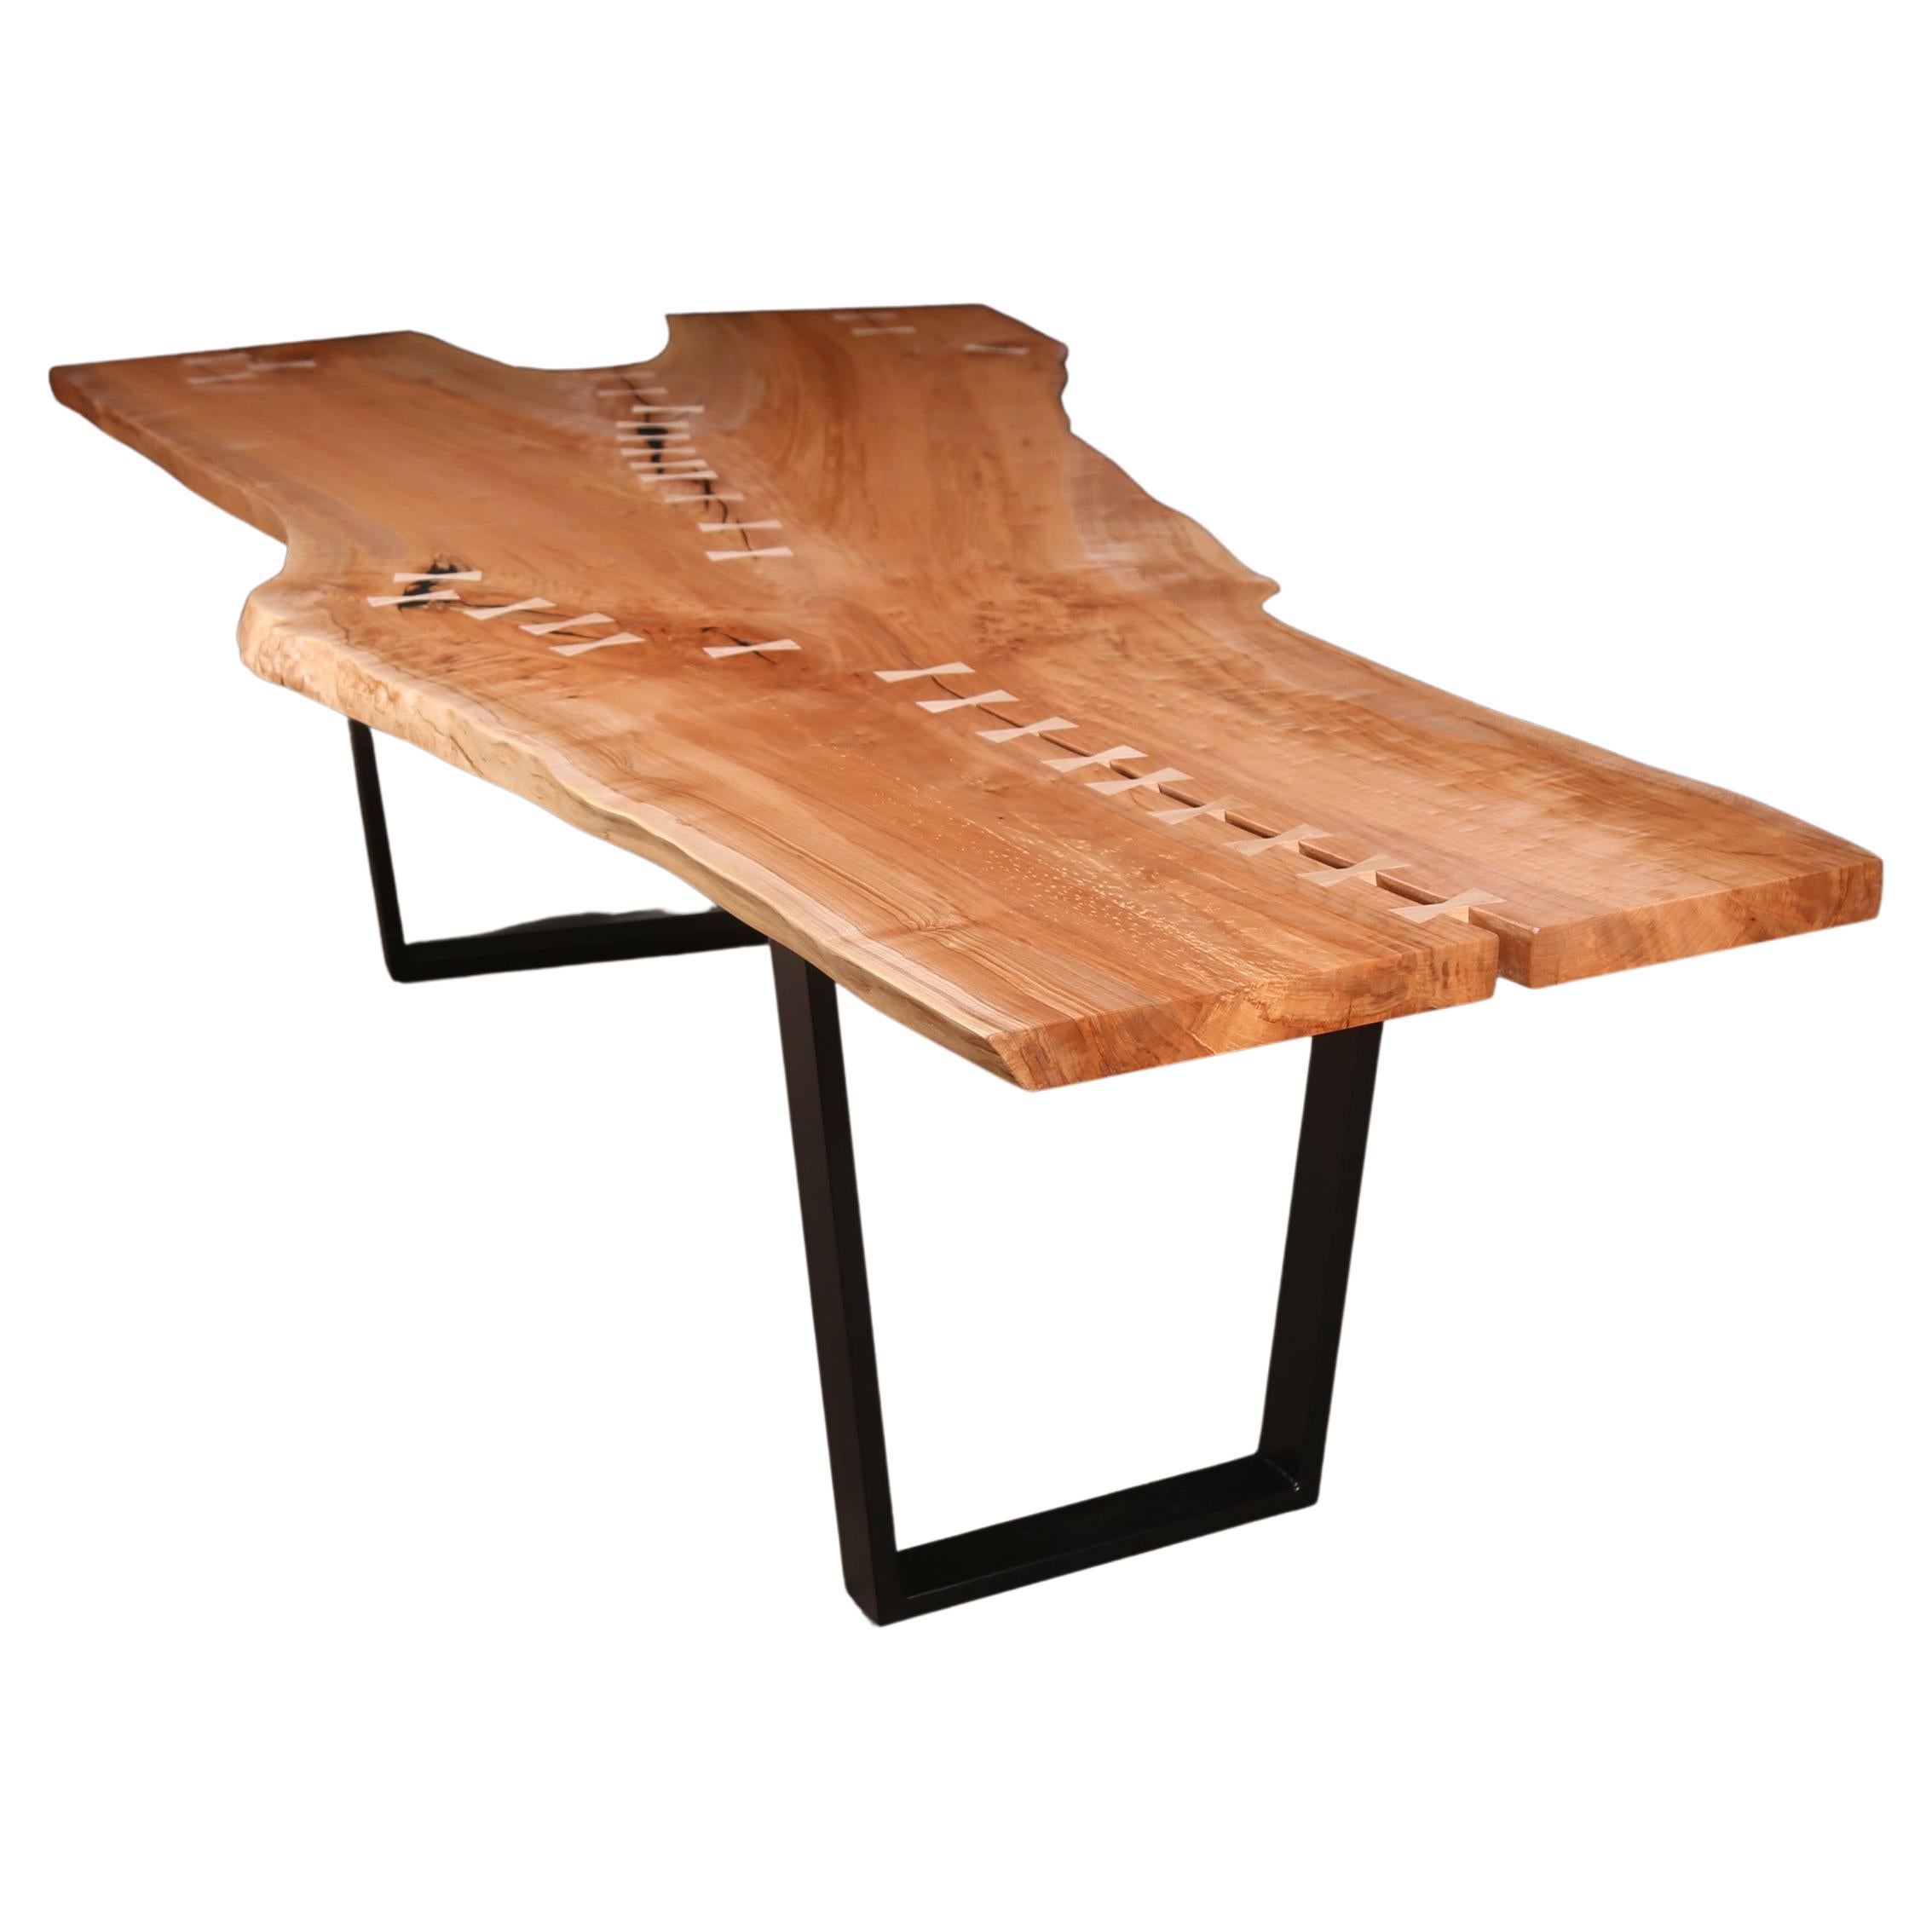 Custom live edge, single slab maple table with bowtie inlay, metal base For Sale